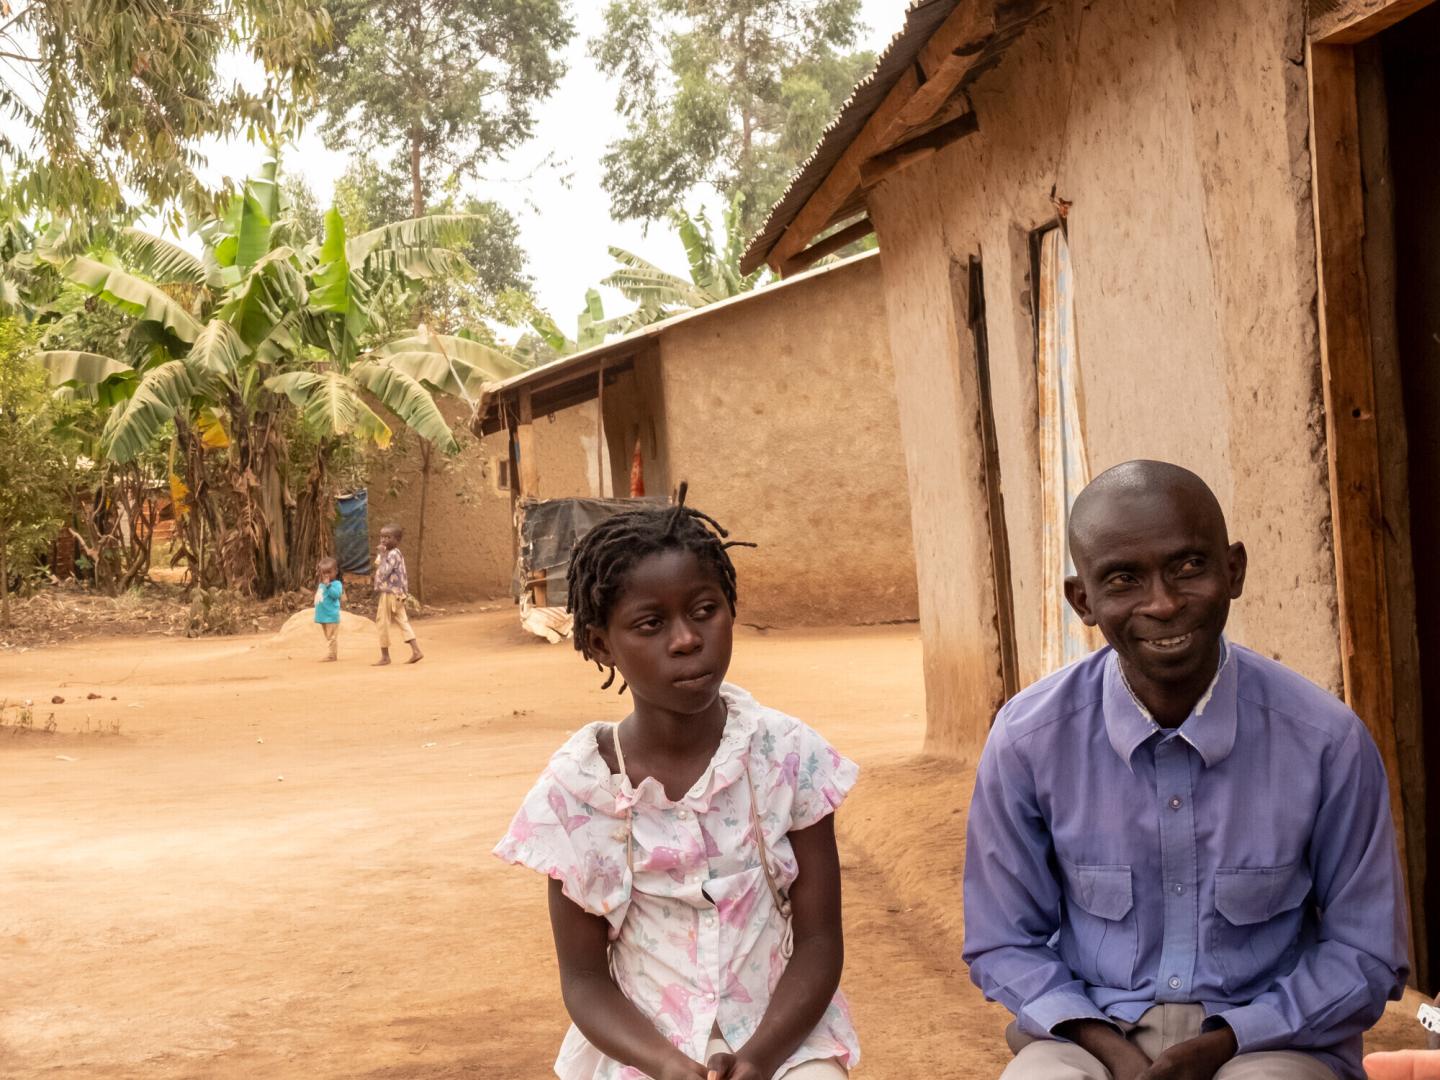 A Ugandan father and daughter sit next to one another outside their home